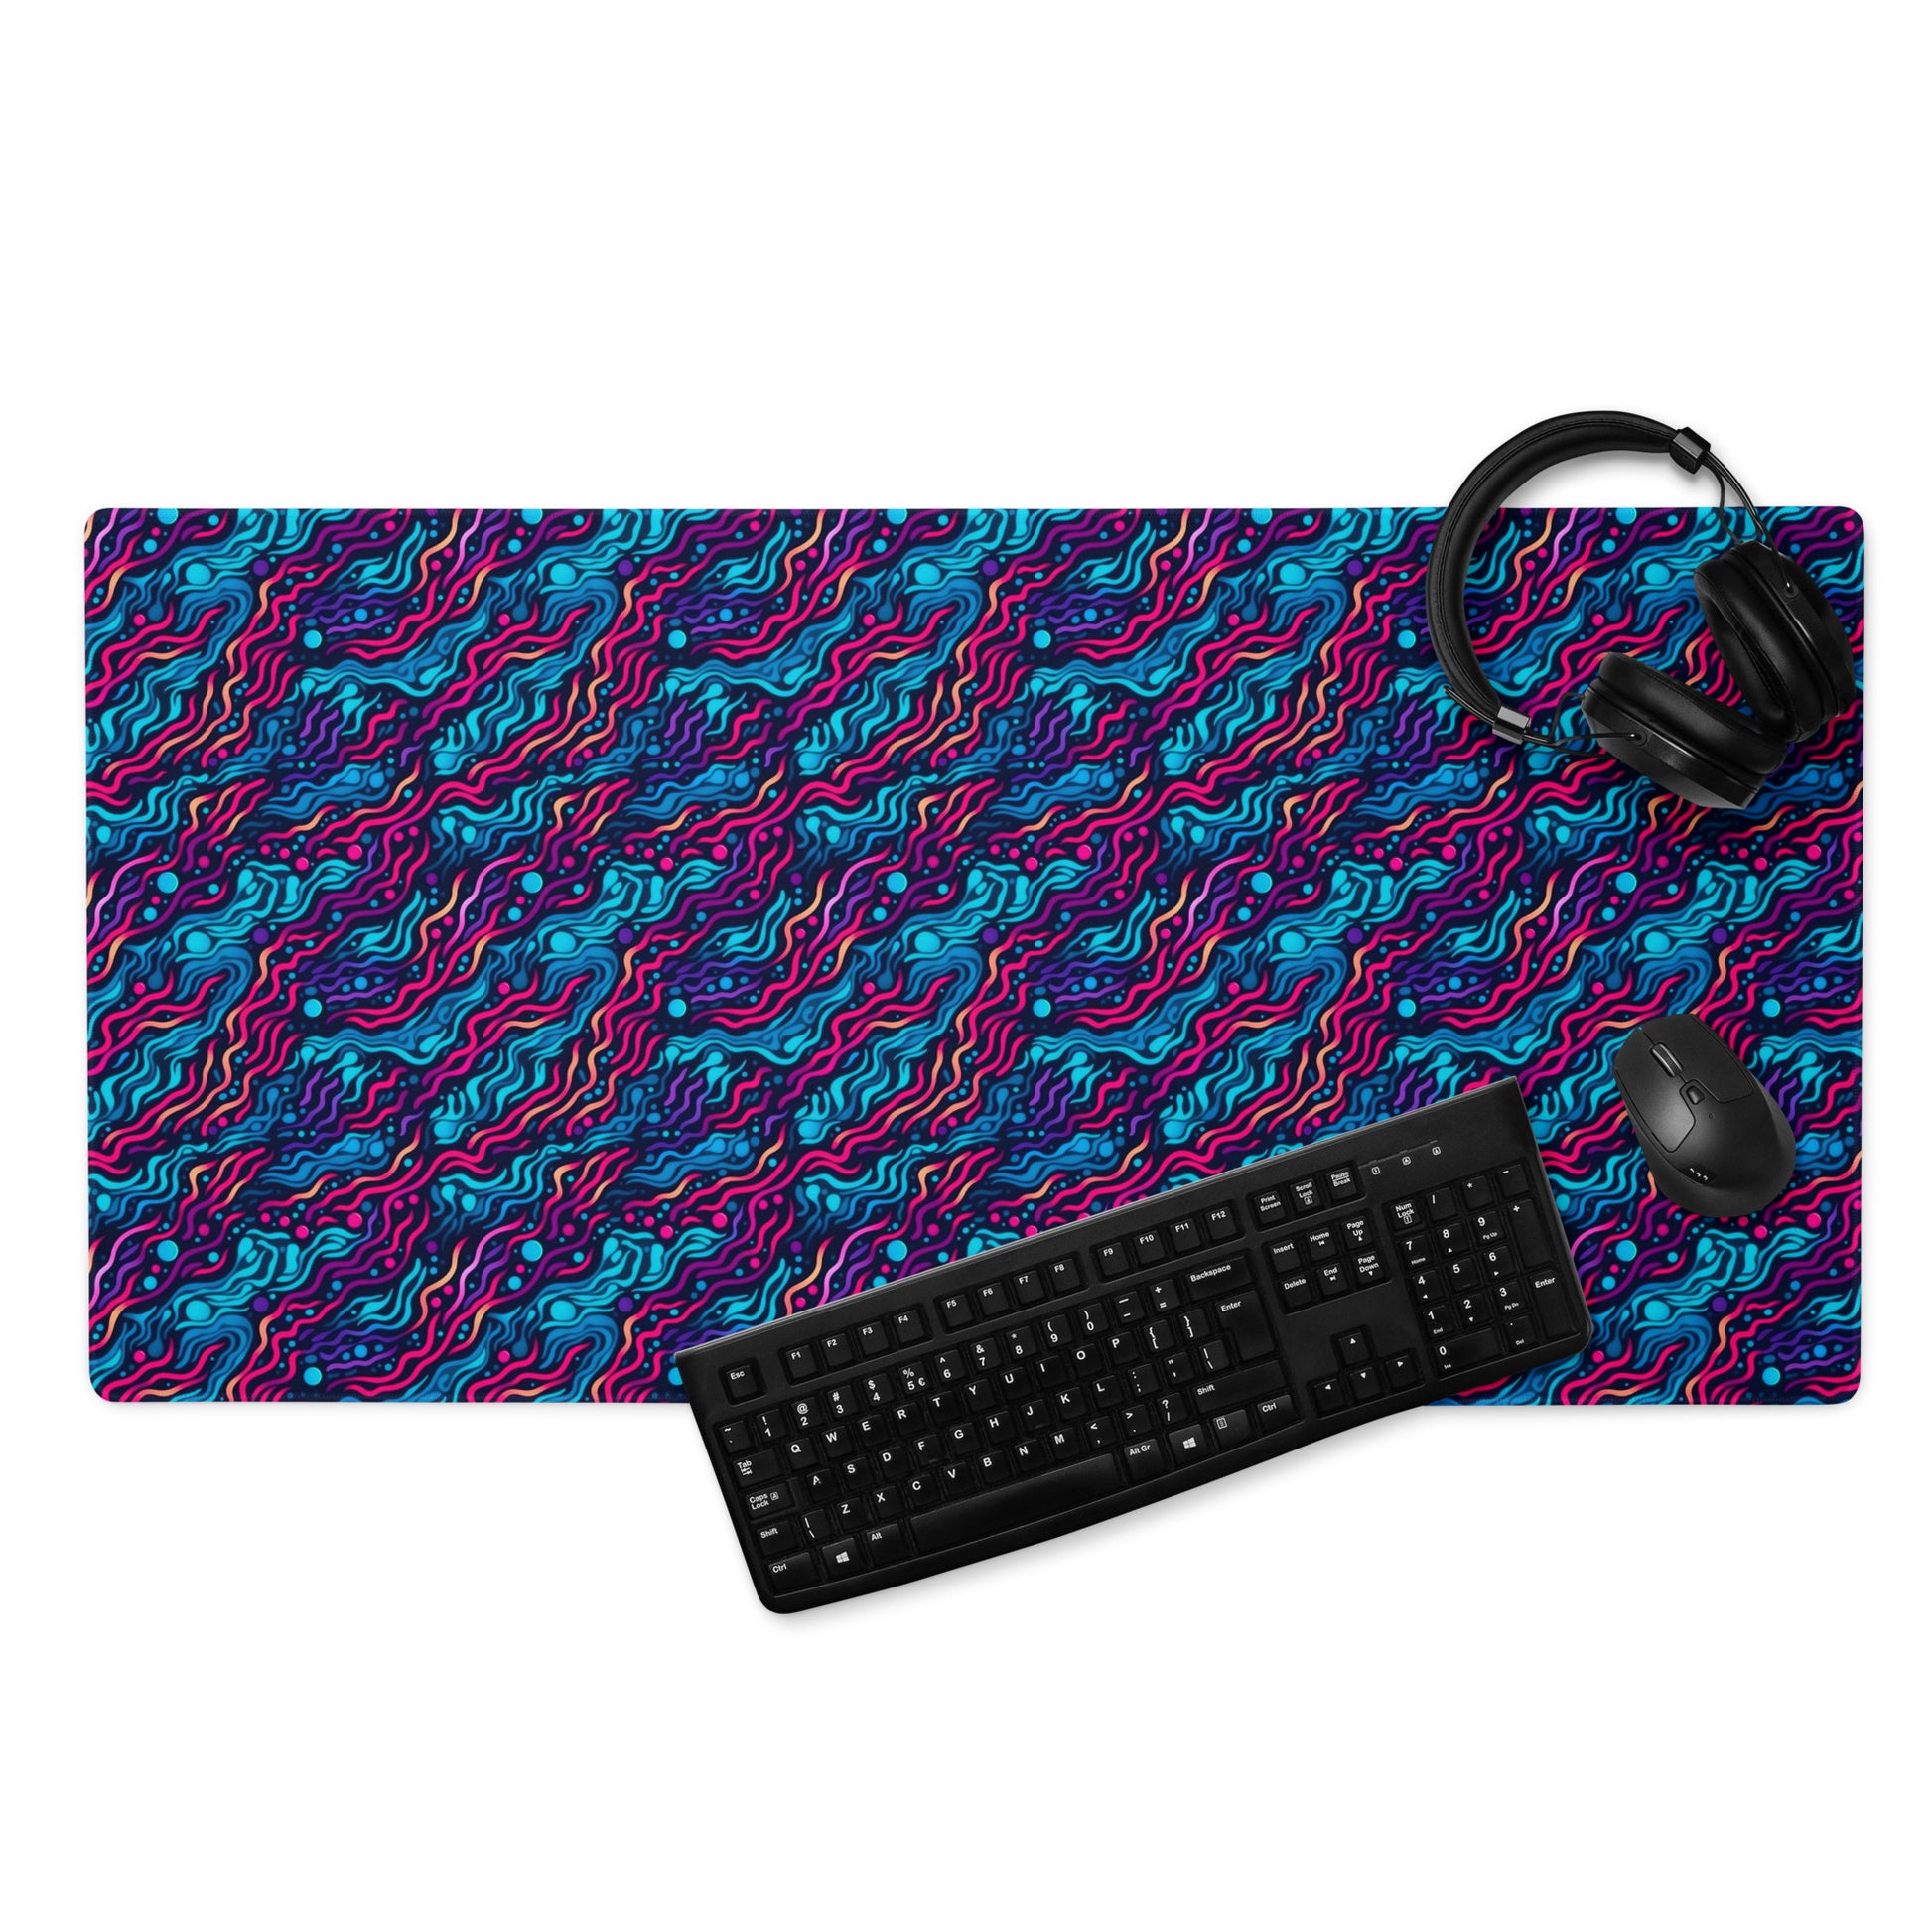 A 36" x 18" desk pad with wavy blue and pink pattern. With a keyboard, mouse, and headphones sitting on it.